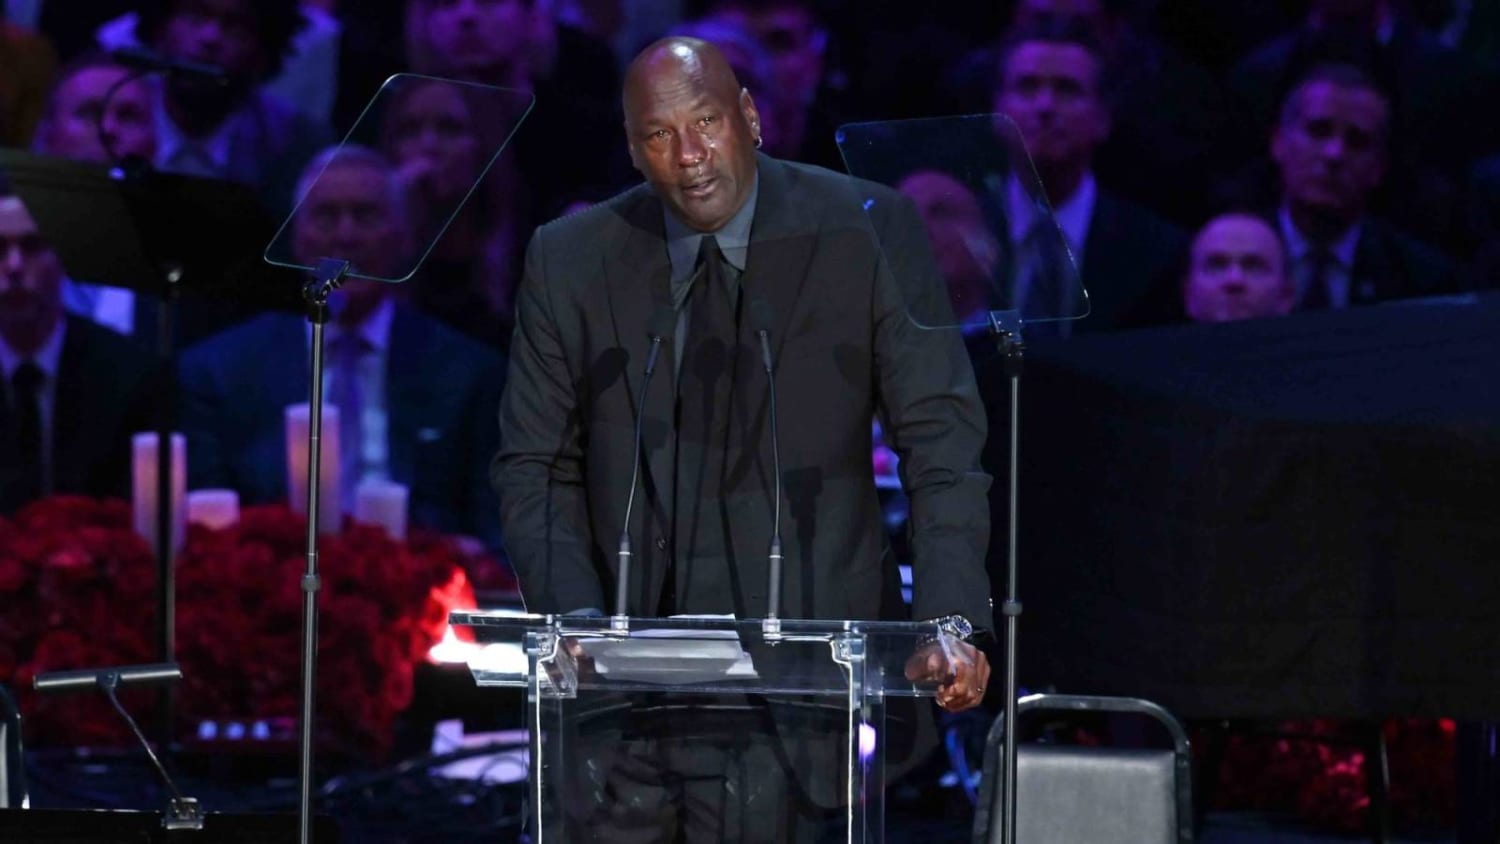 Michael Jordan on inducting Kobe Bryant: 'I'm not going to be nervous about showing emotions'